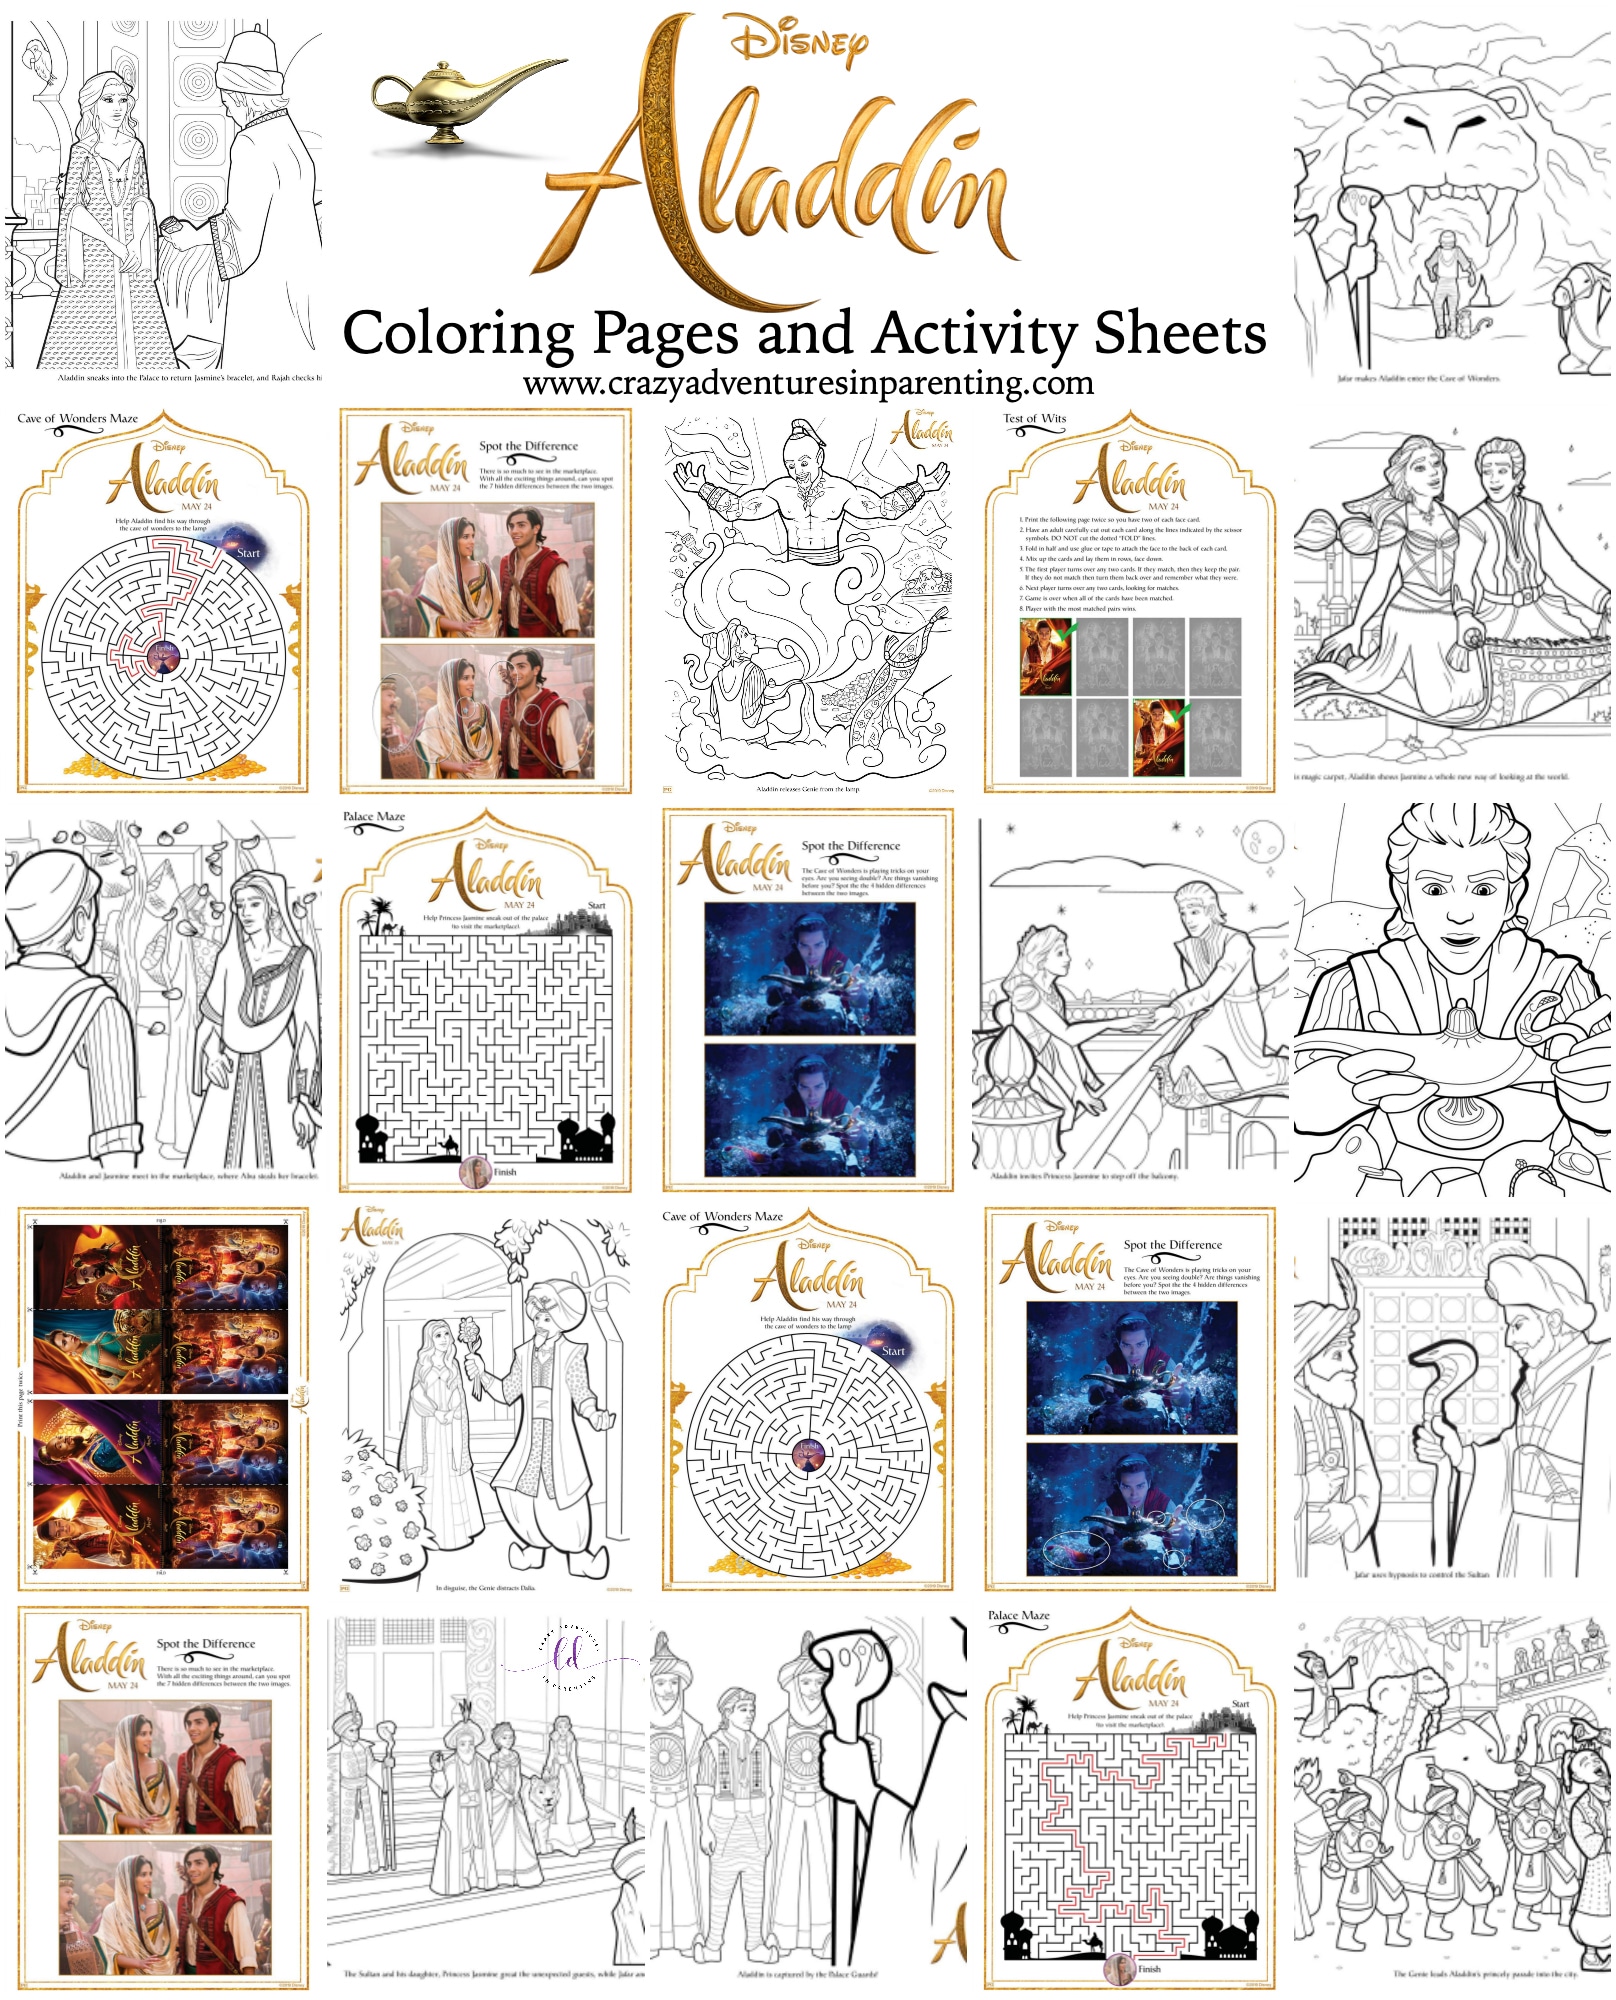 Aladdin Coloring Pages and Activity Sheets   Crazy Adventures in ...